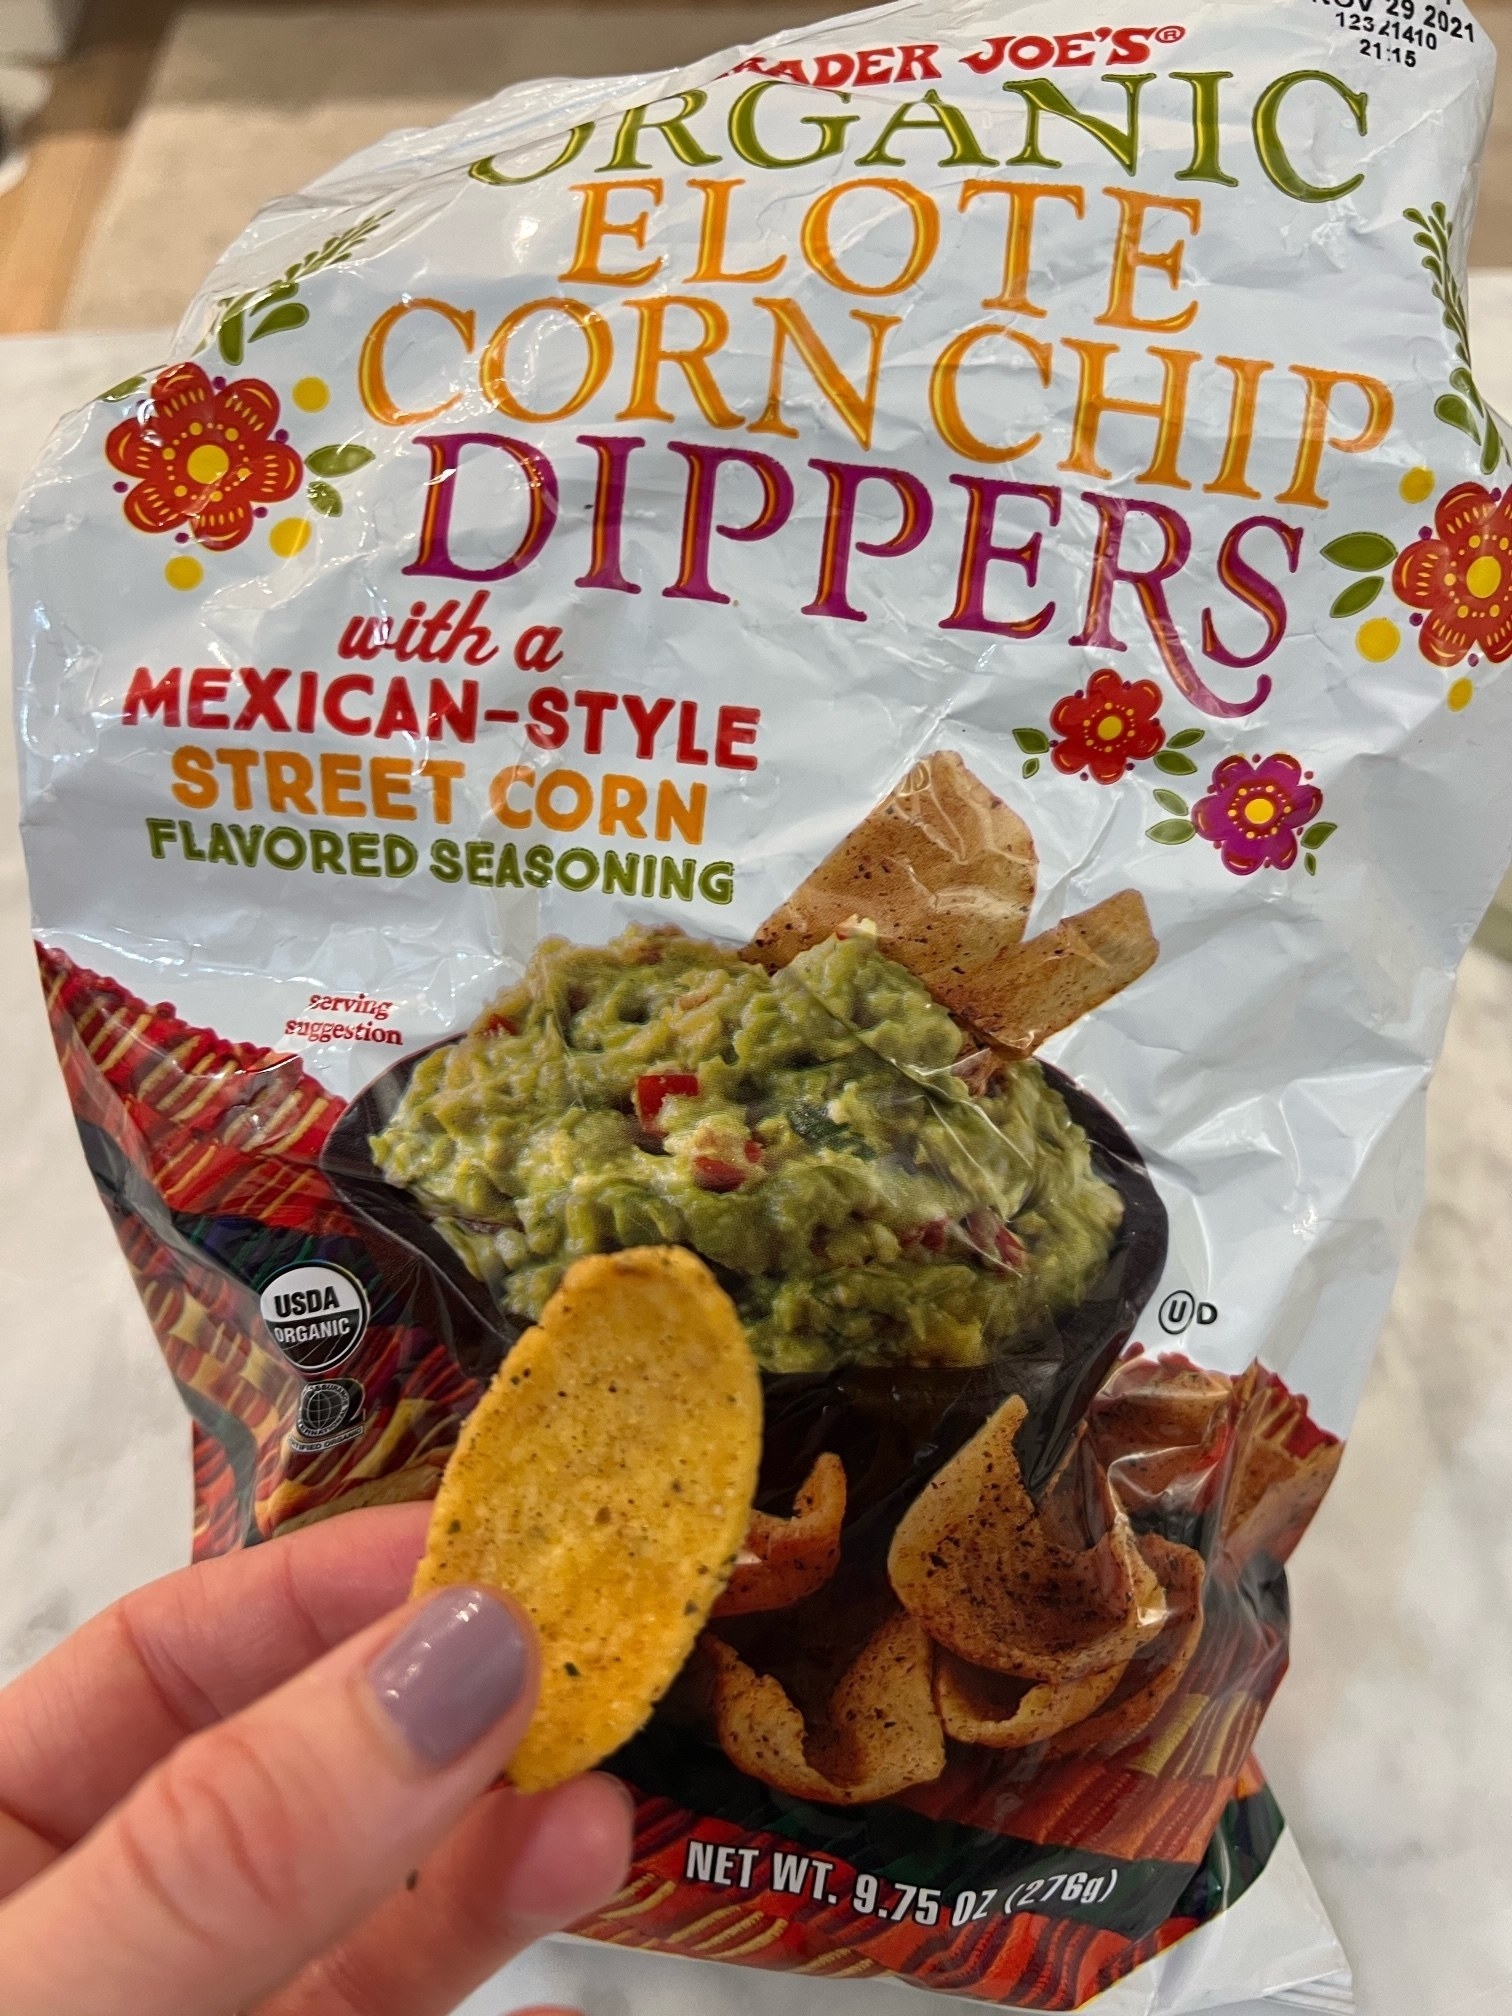 A bag of Elote Corn Chip Dippers.